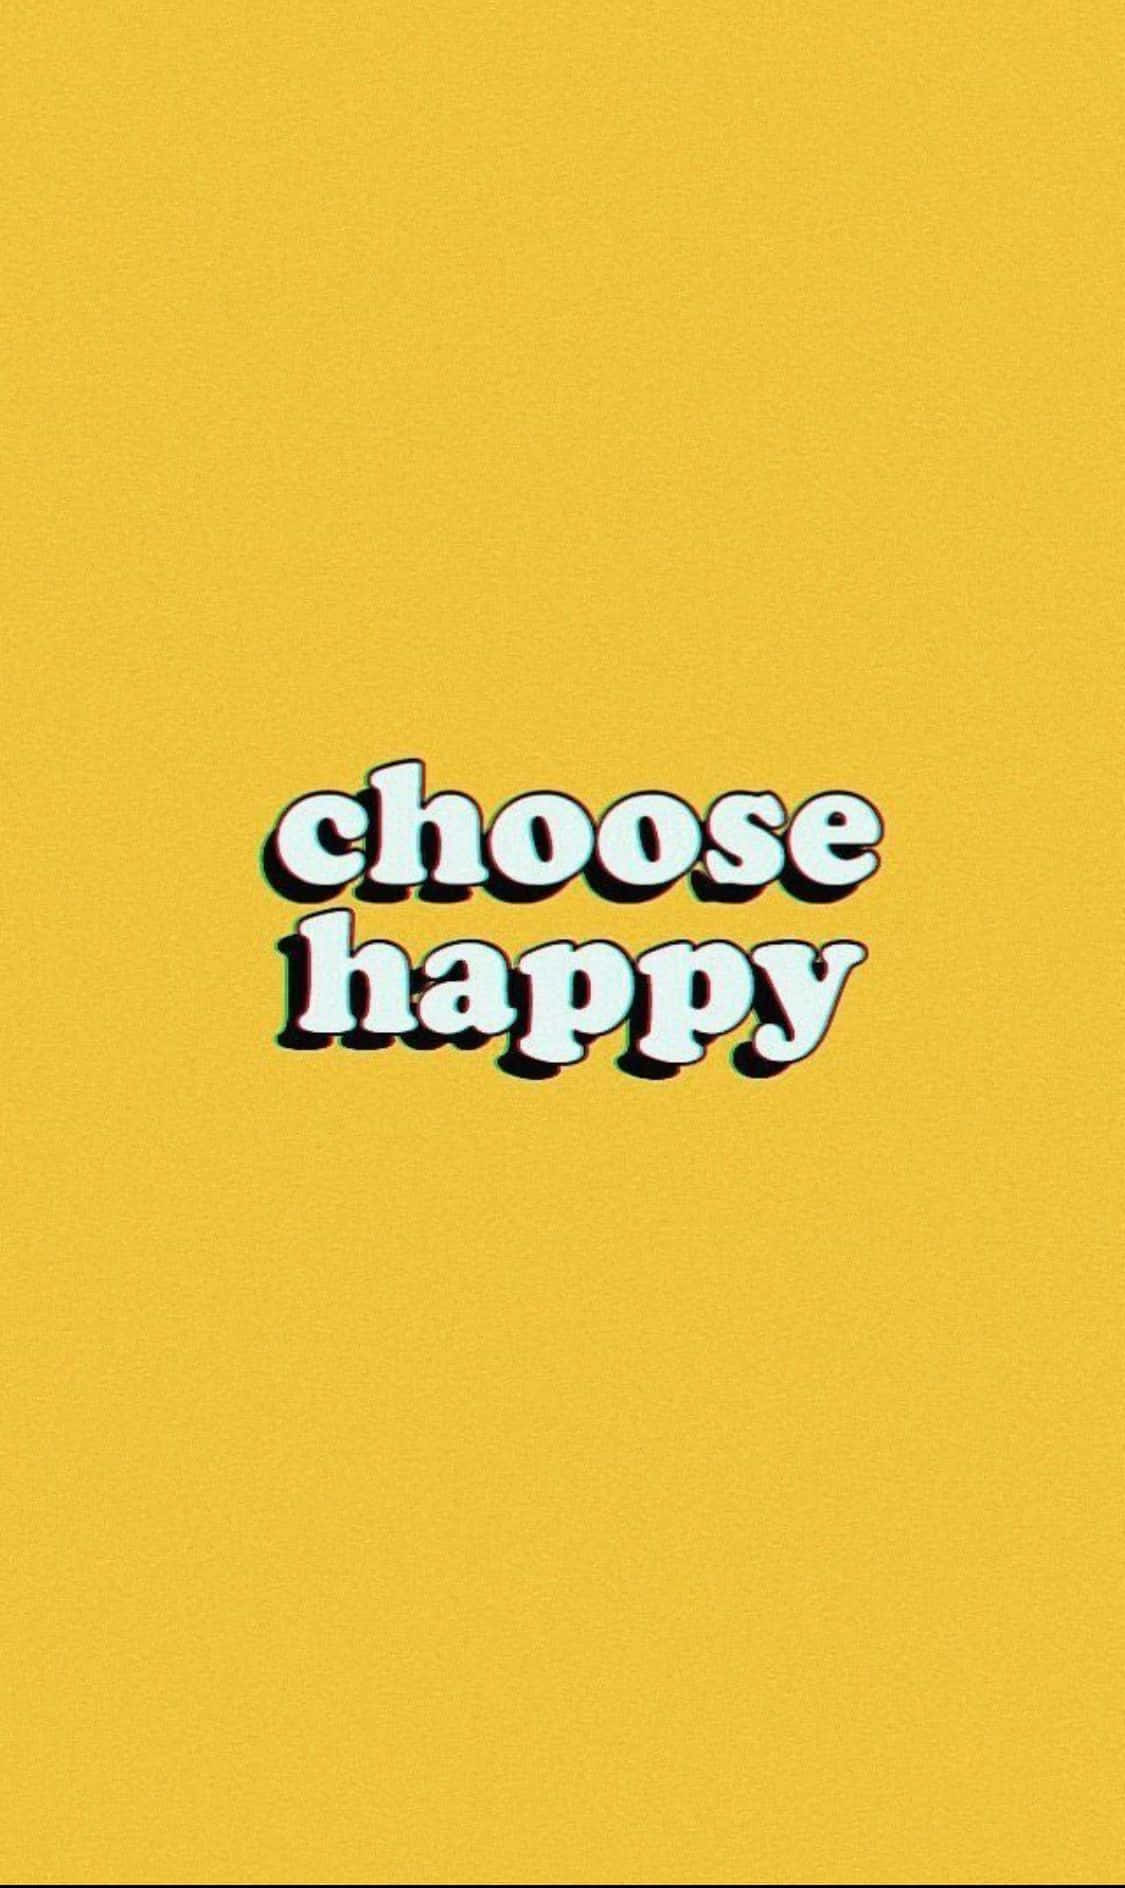 Choose Happy - A Yellow Background With The Words Background